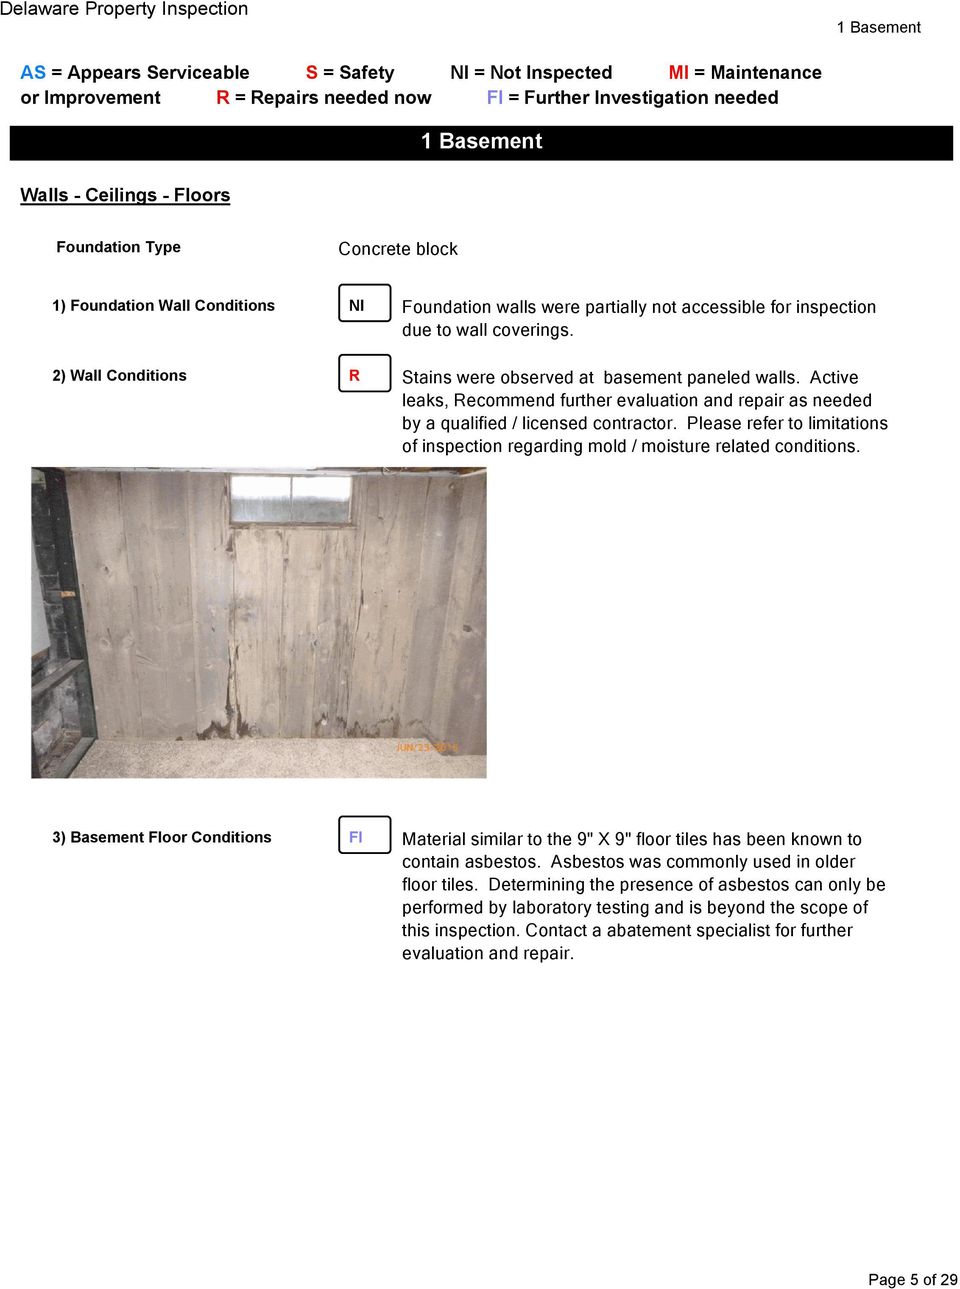 Please refer to limitations of inspection regarding mold / moisture related conditions. 3) Basement Floor Conditions FI Material similar to the 9" X 9" floor tiles has been known to contain asbestos.